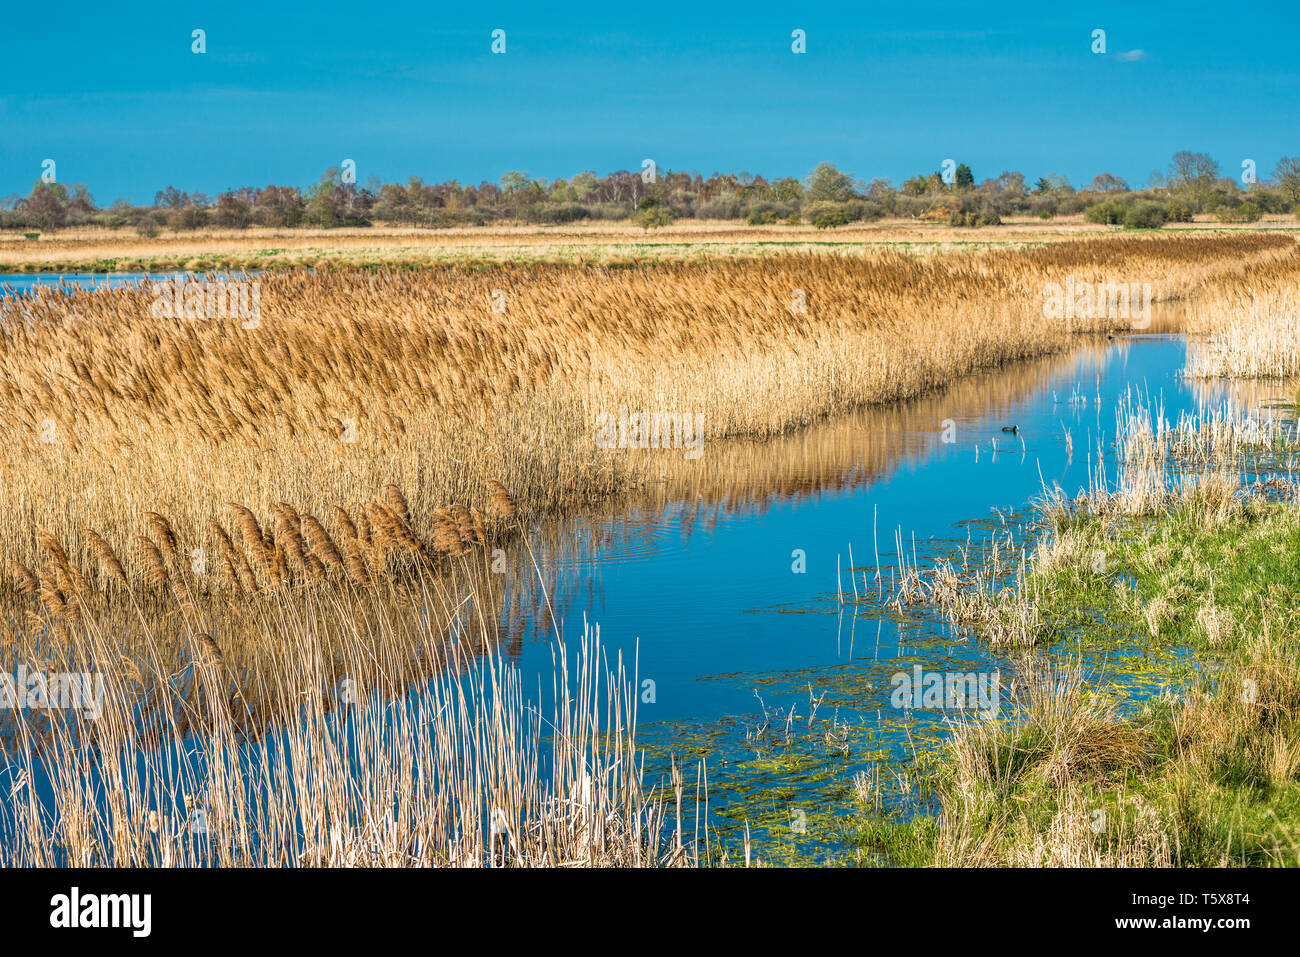 The warm evening sun hits reed beds at Wicken Fen Nature Reserve in Cambridgeshire, East Anglia, England, UK. Stock Photo